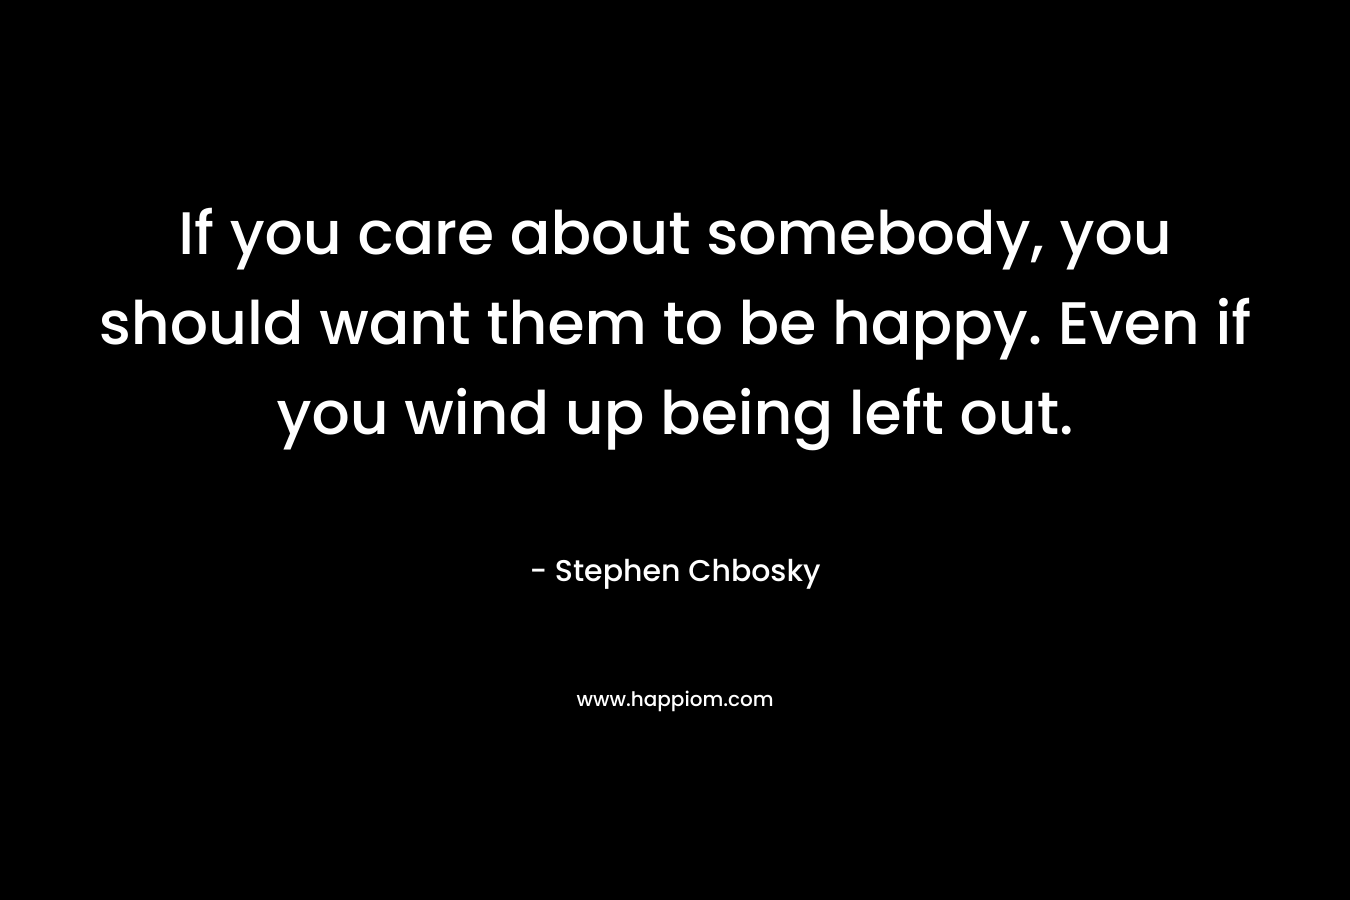 If you care about somebody, you should want them to be happy. Even if you wind up being left out.